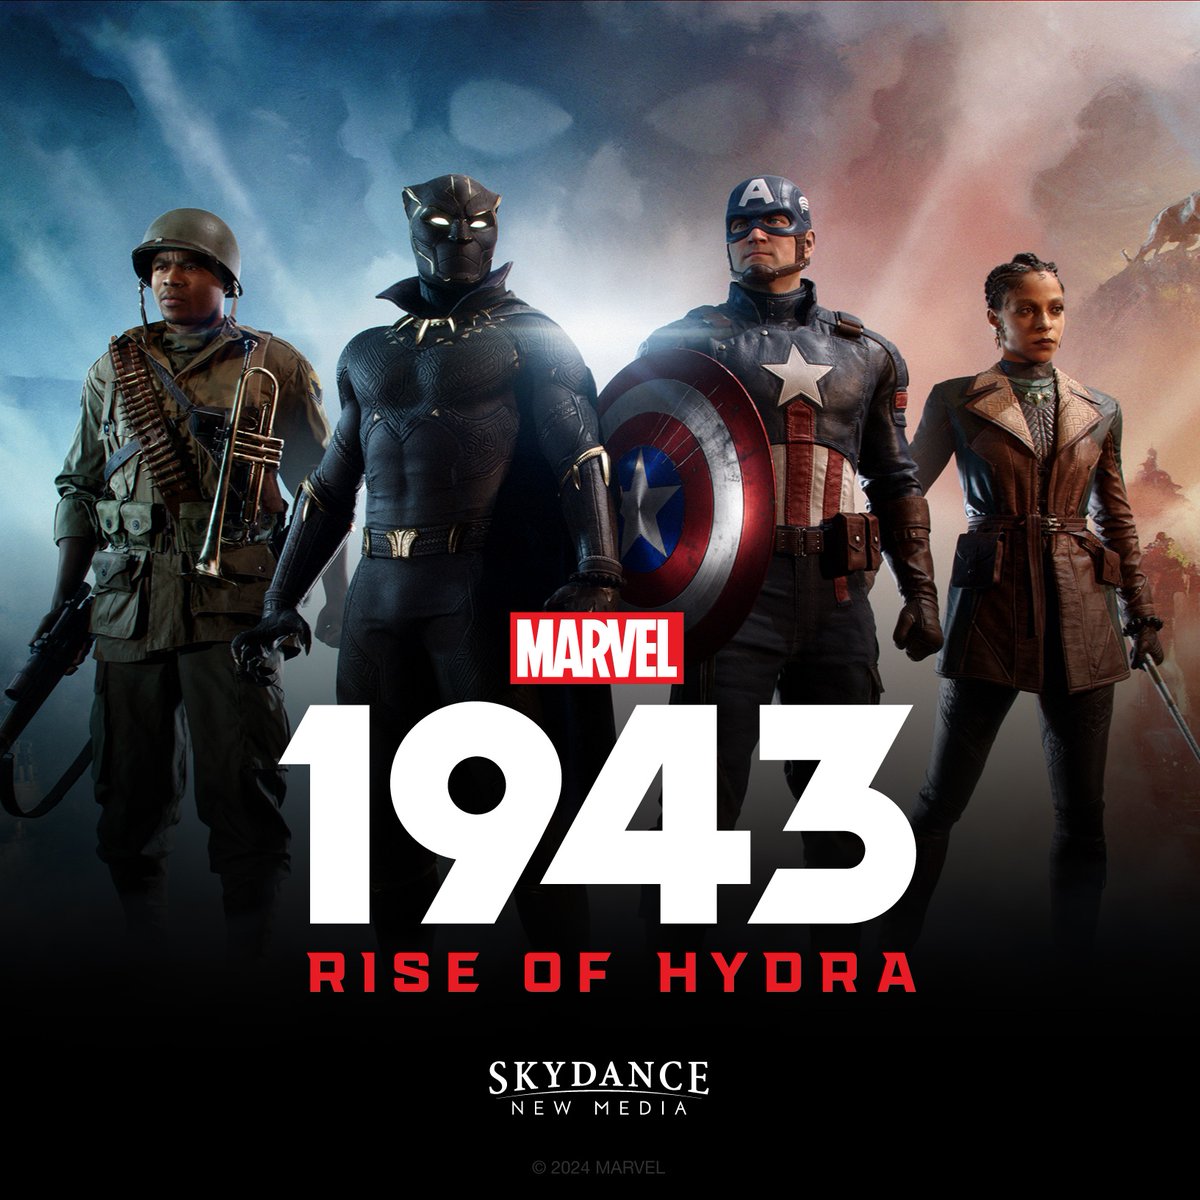 Introducing @Skydance New Media and Marvel Games' new title: 'Marvel 1943: Rise of Hydra'. Learn more: spr.ly/6017kxe9c #GDC2024 #Marvel1943